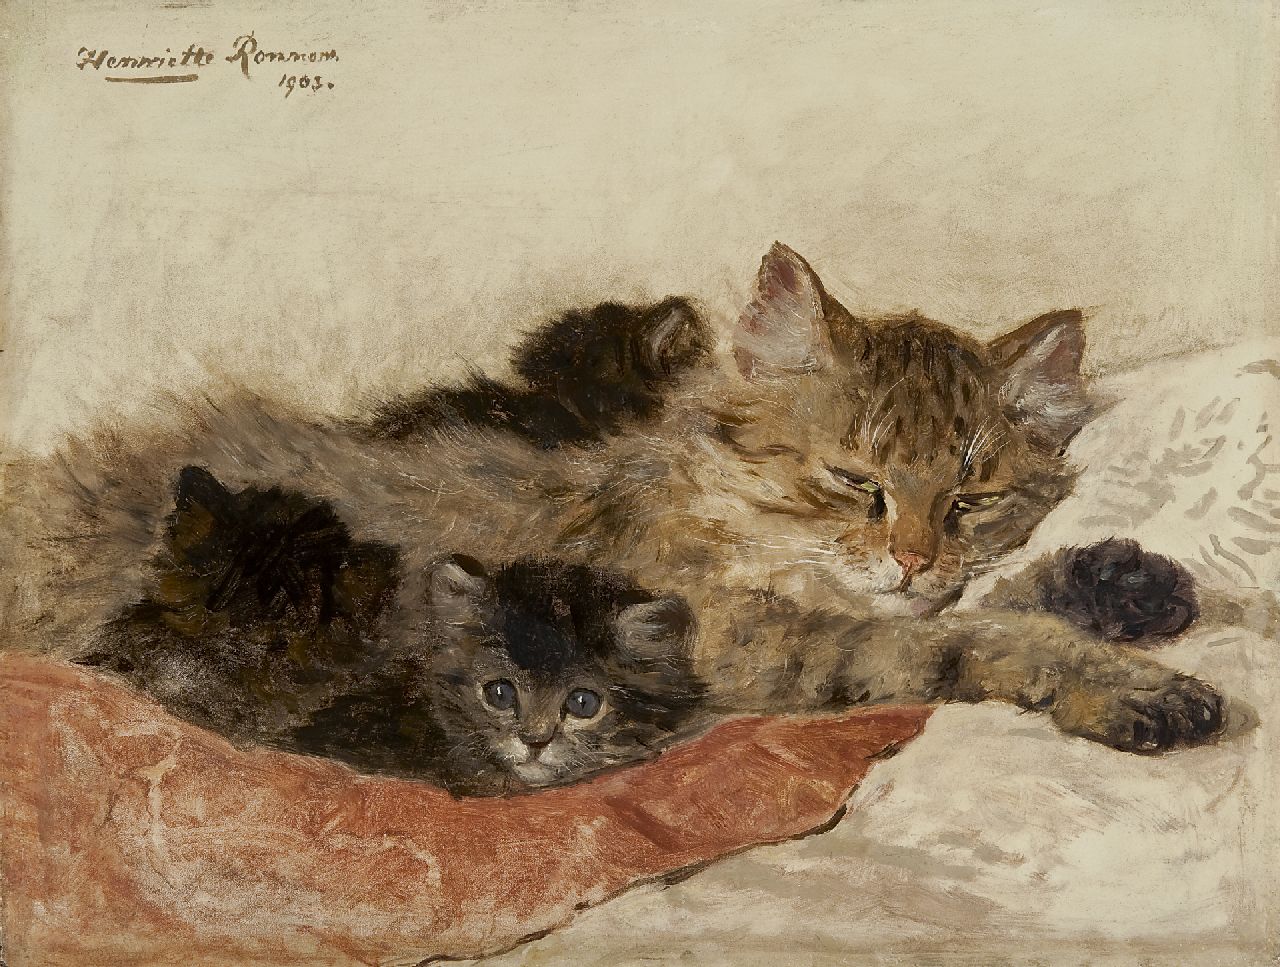 Ronner-Knip H.  | Henriette Ronner-Knip, Dozing cat with her kittens, oil on panel 27.9 x 36.5 cm, signed u.l. and dated 1903